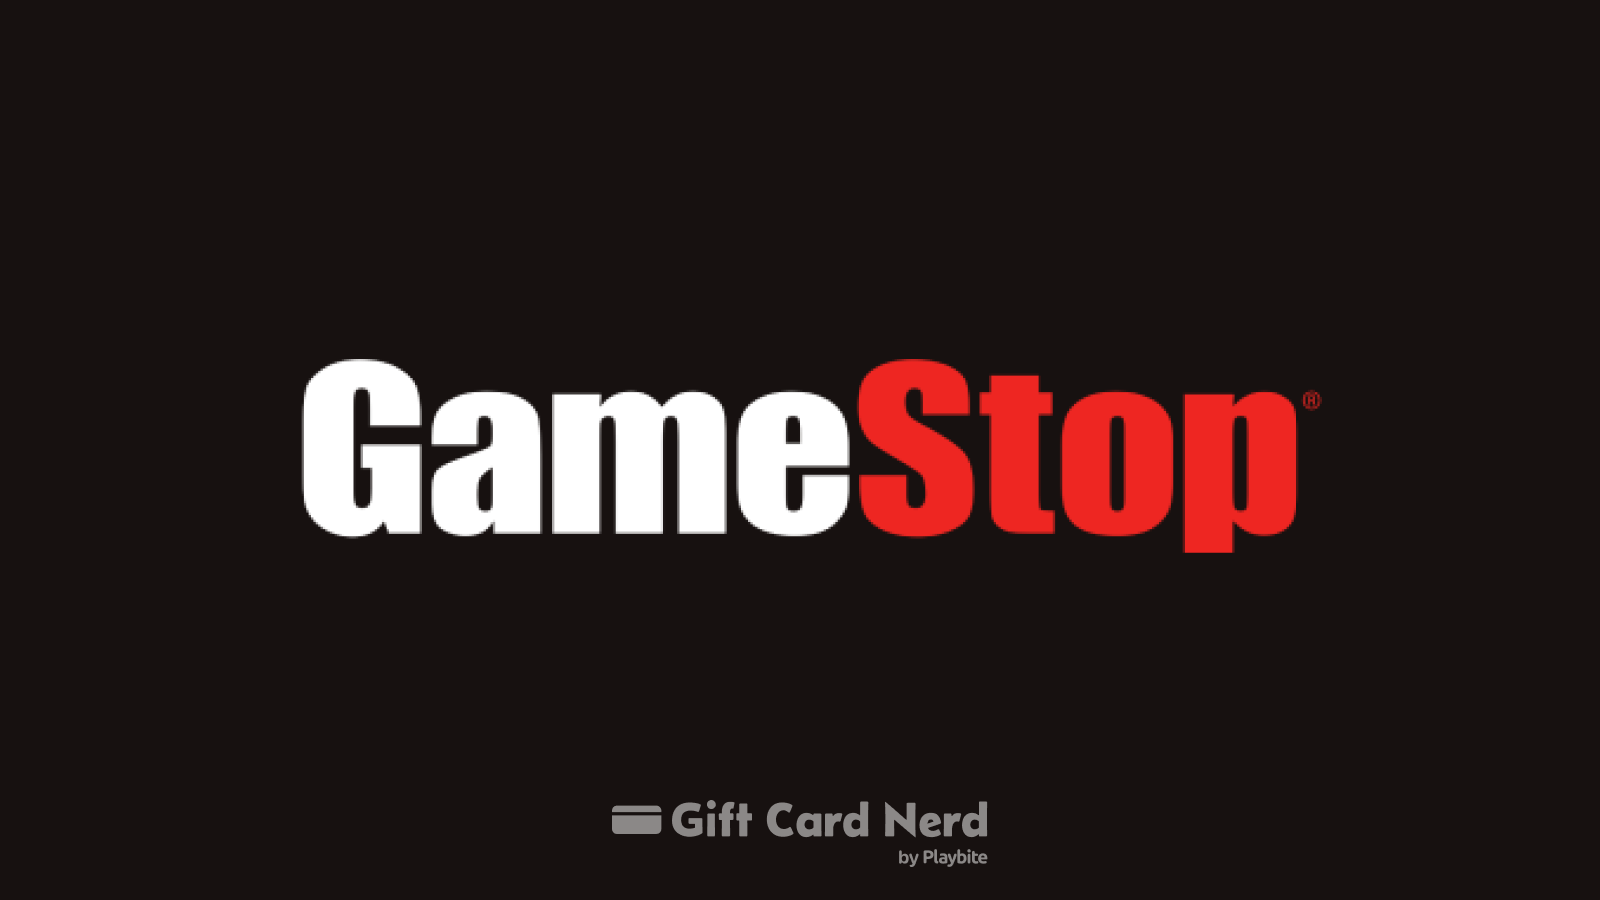 Can You Use a GameStop Gift Card on Venmo?